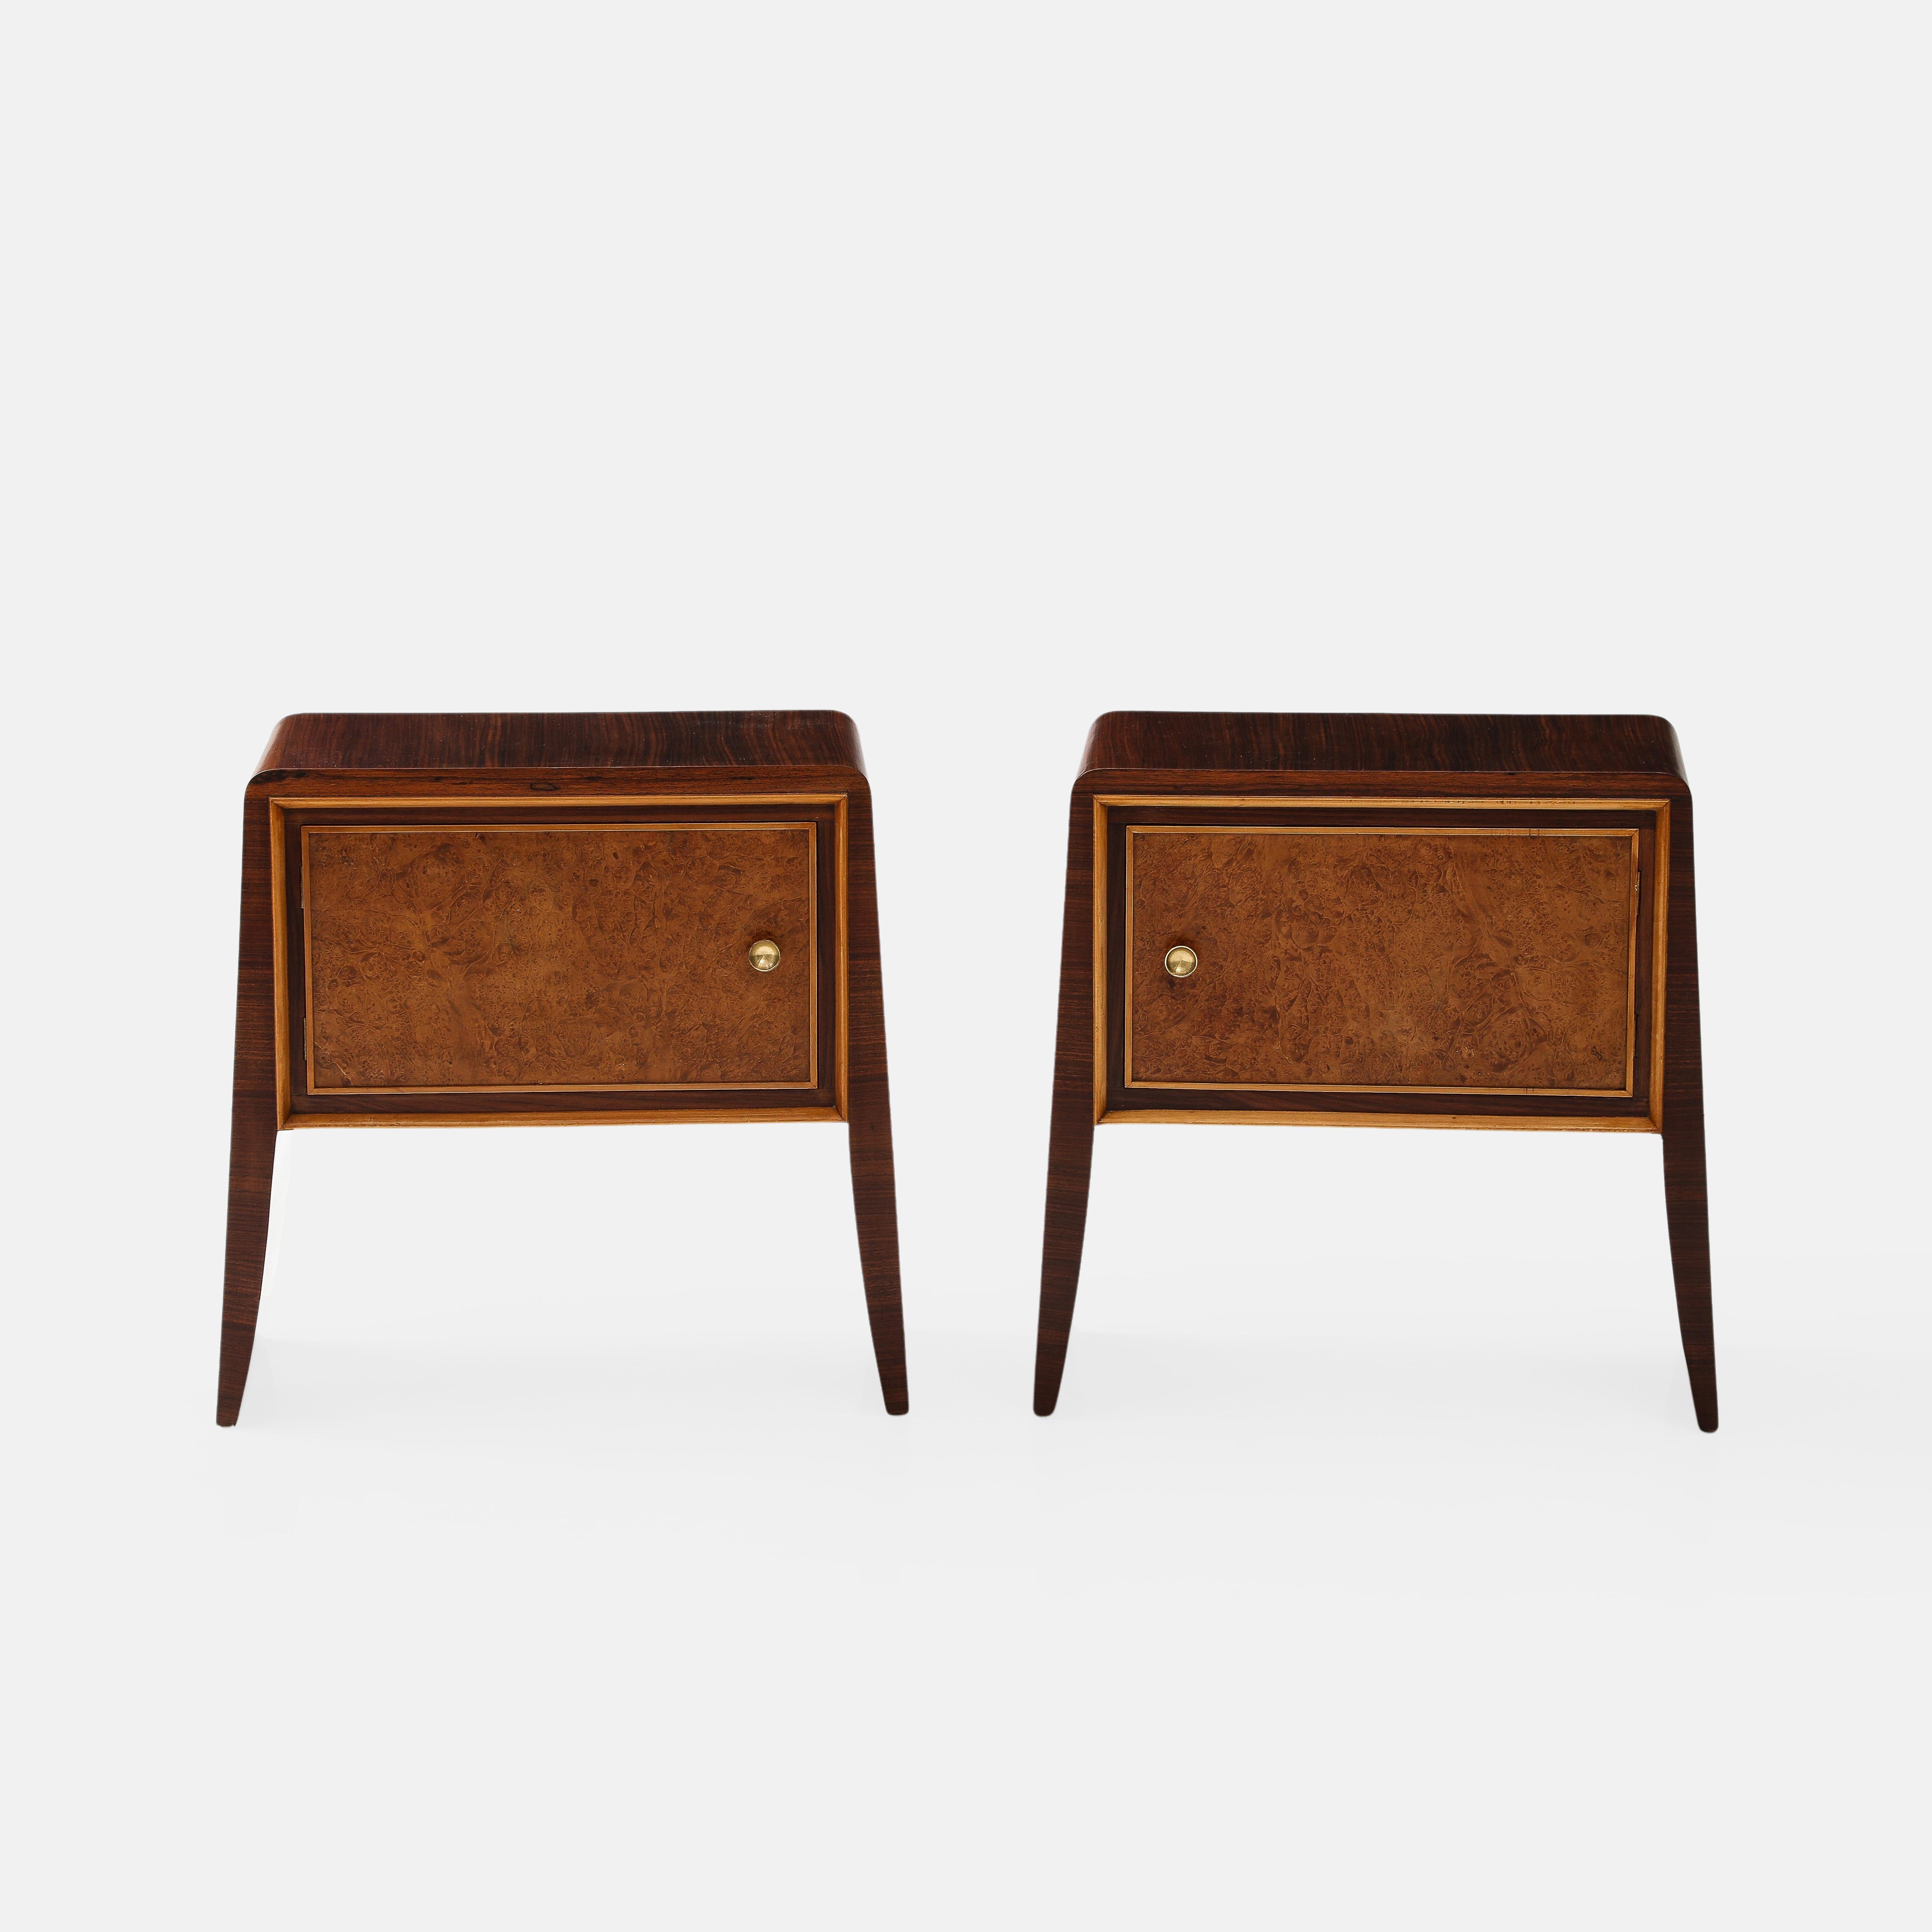 Polished 1950s Pair of Rosewood and Birchwood Nightstands or Bedside Tables For Sale